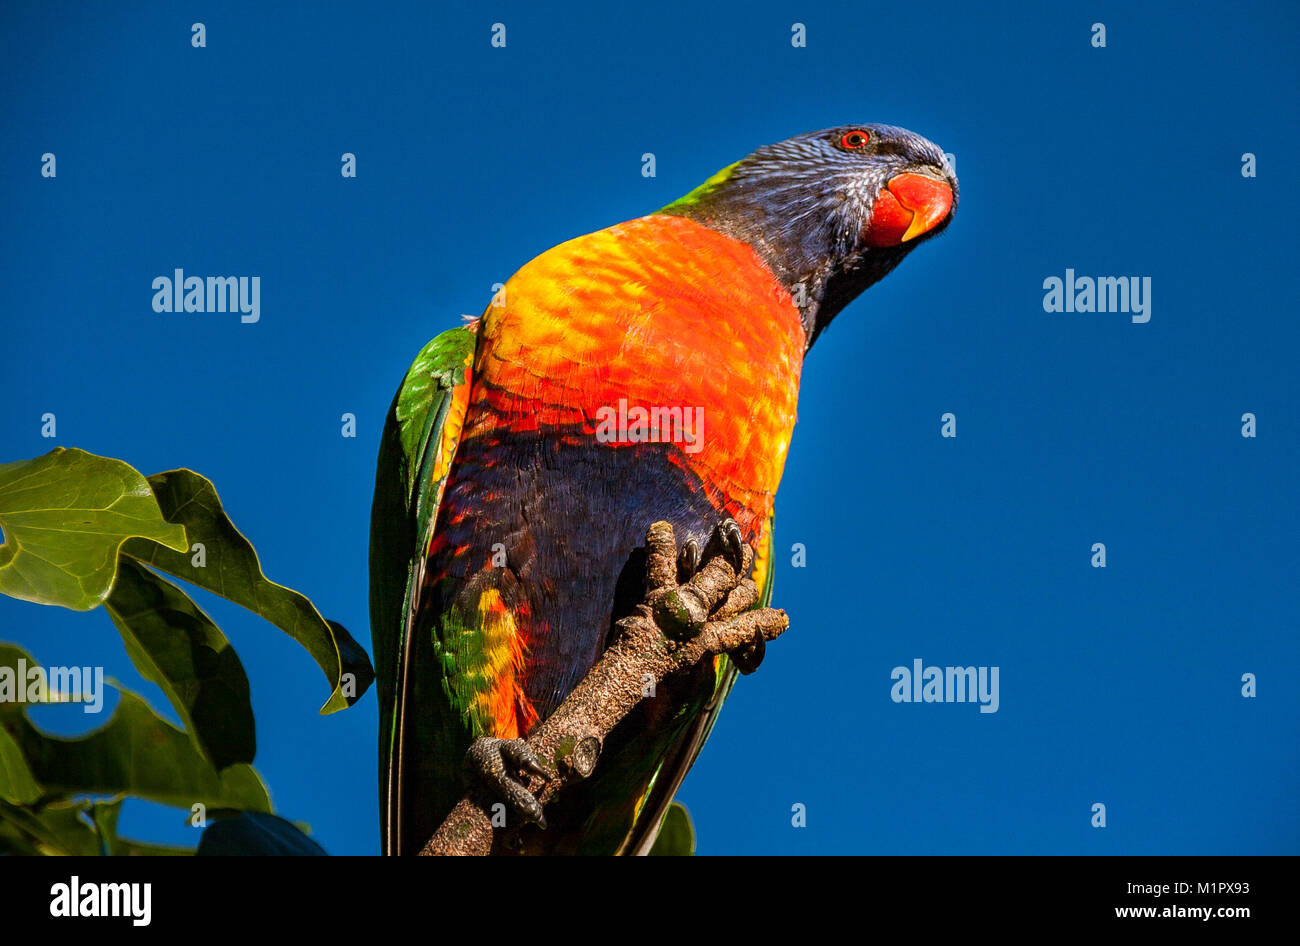 Rainbow lorikeet surrounded by a blue sky as it is perched on the top branch of an illawarra flame tree (brachychiton acerifolius) looking down Stock Photo